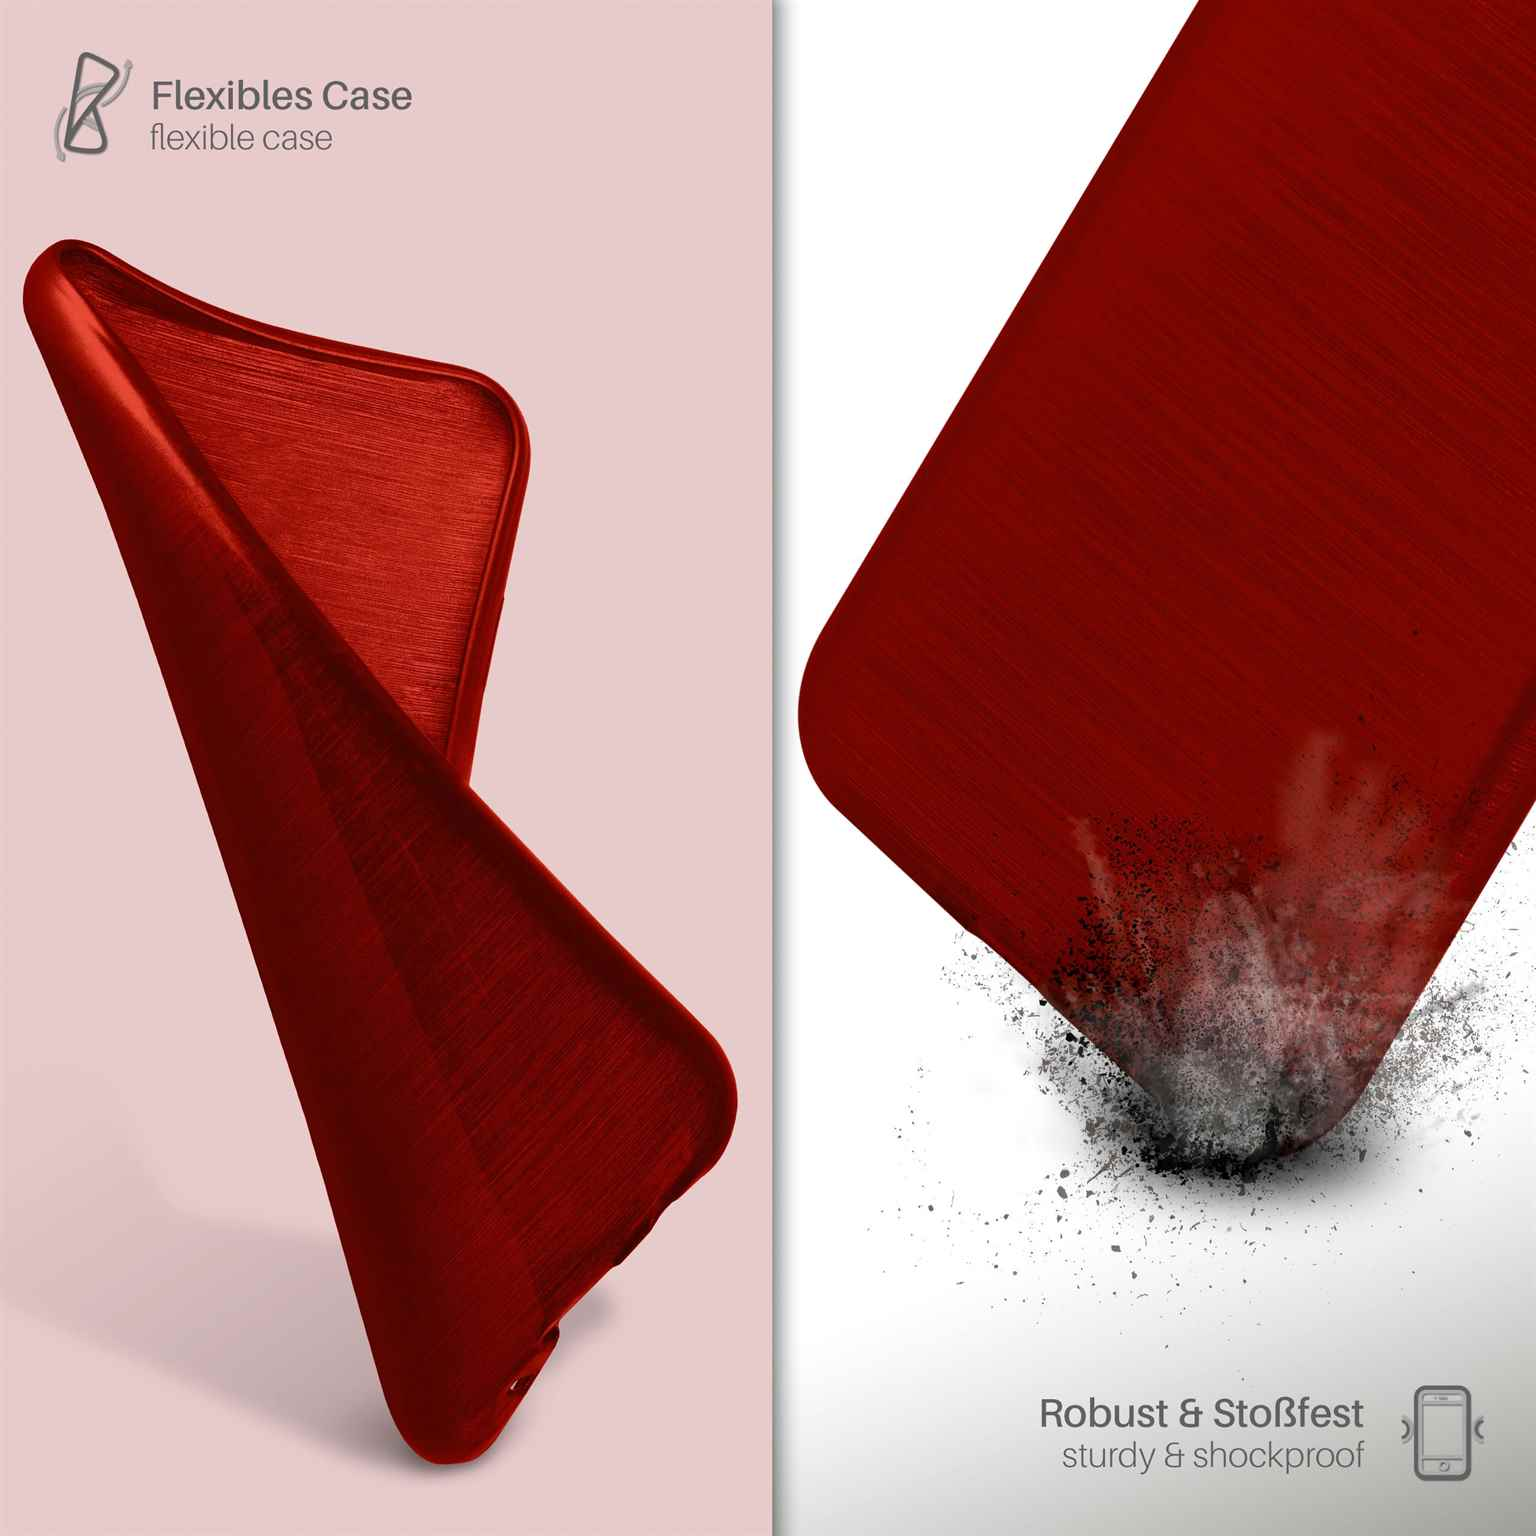 MOEX Brushed Backcover, Case, Crimson-Red XS, iPhone Apple